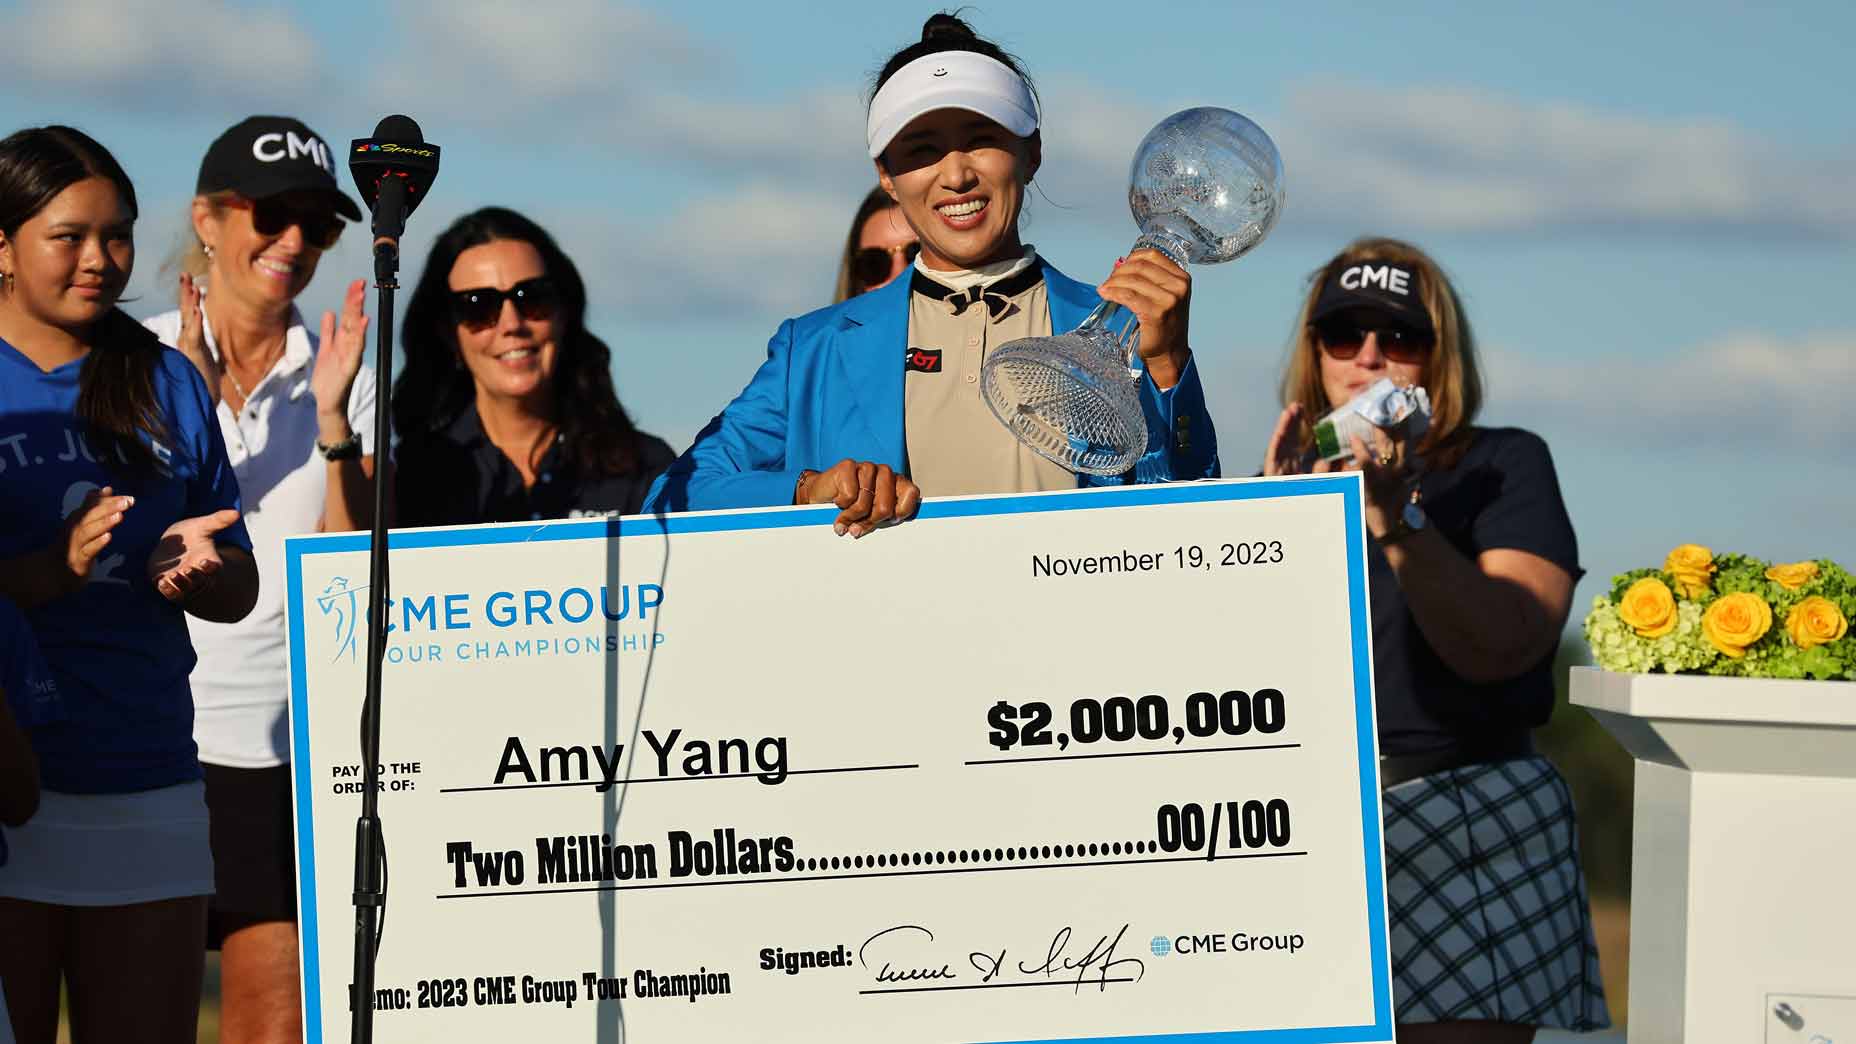 amy yang holds trophy and check for winning 2023 cme group tour championship